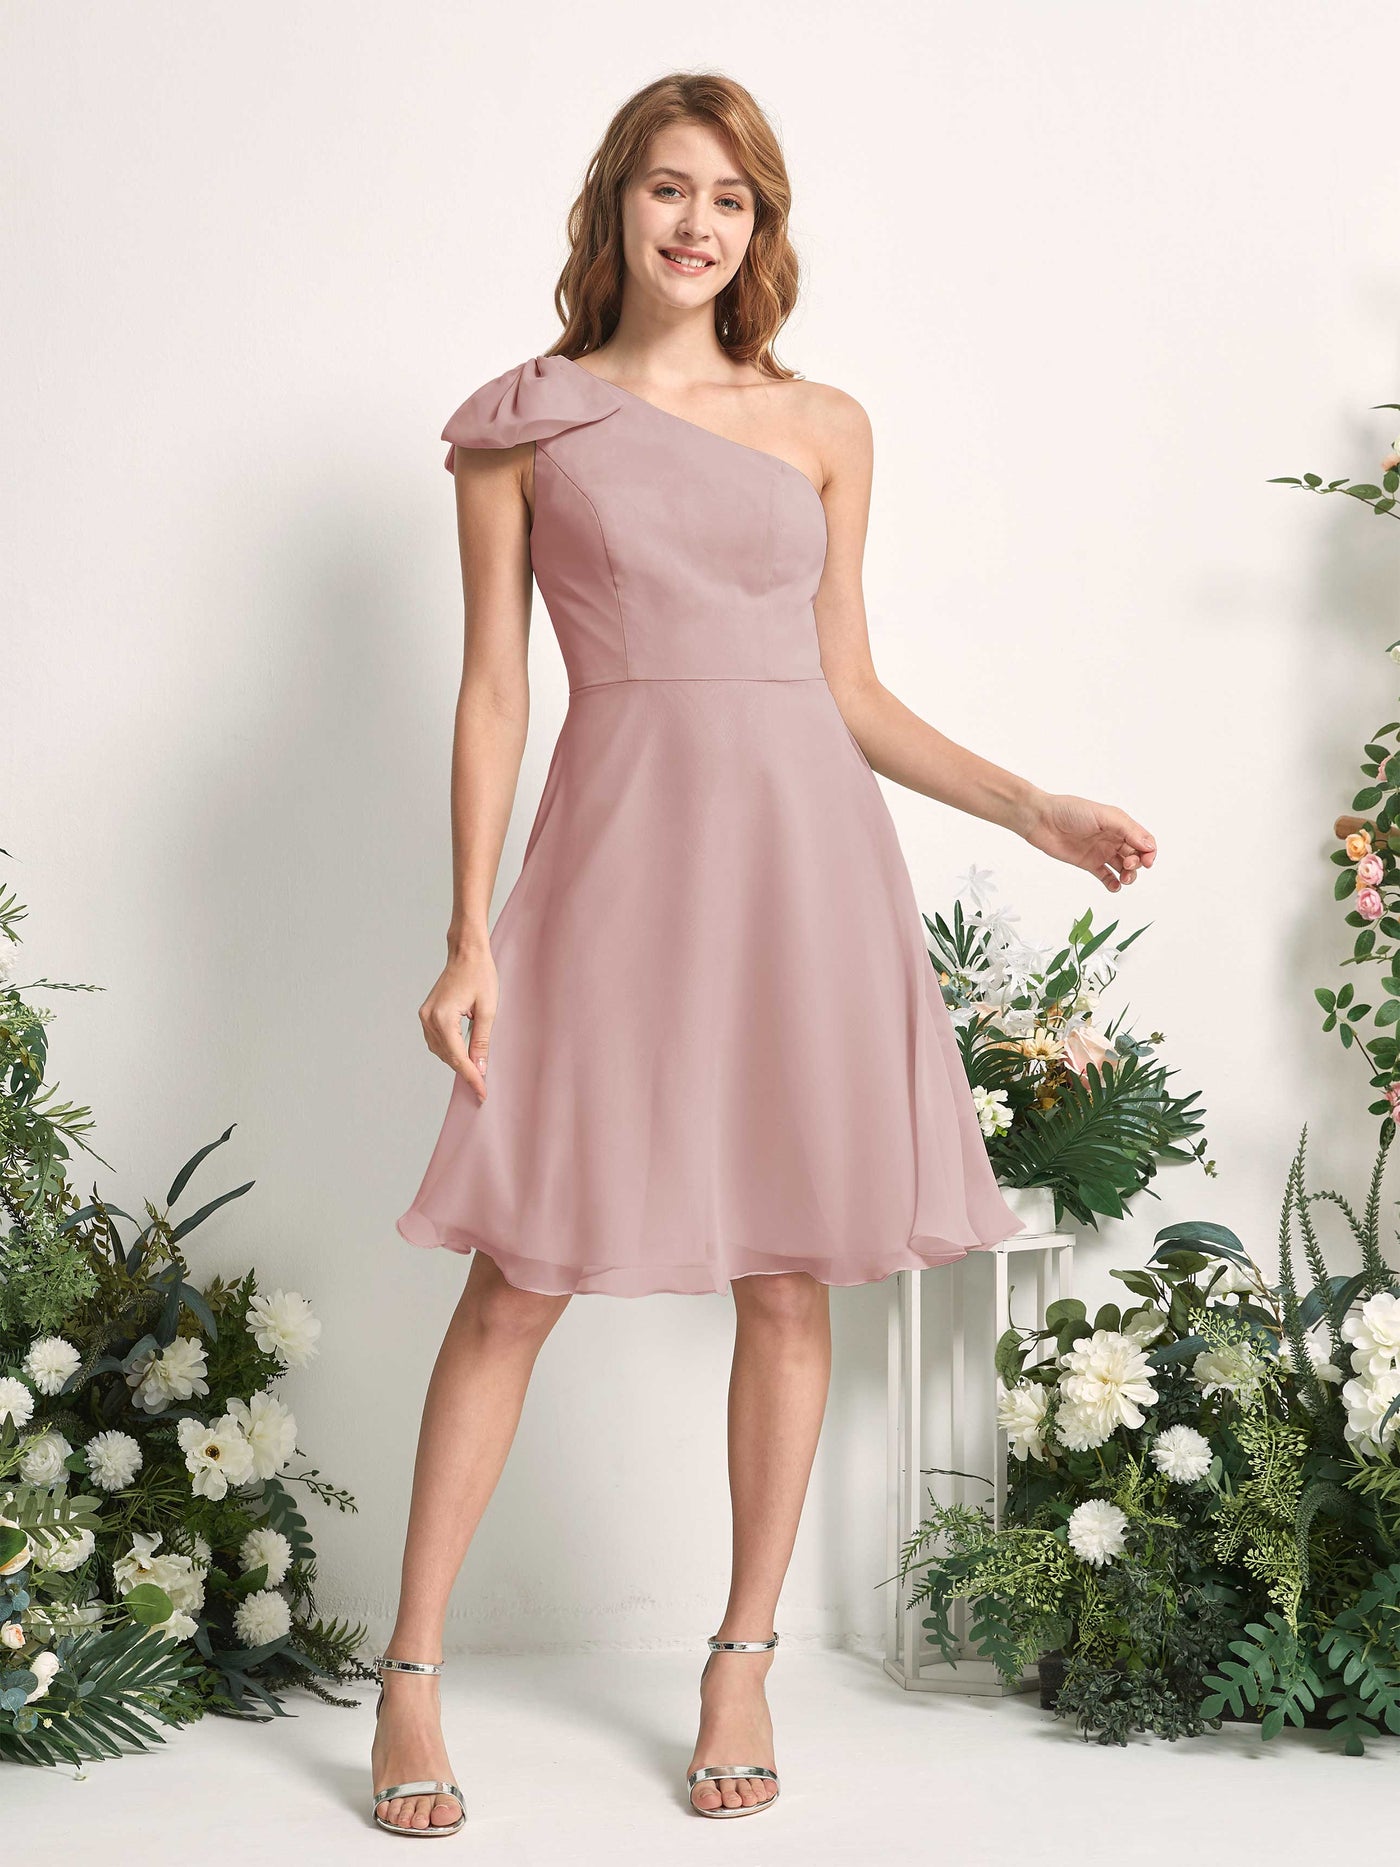 Bridesmaid Dress A-line Chiffon One Shoulder Knee Length Sleeveless Wedding Party Dress - Dusty Rose (81227009)#color_dusty-rose